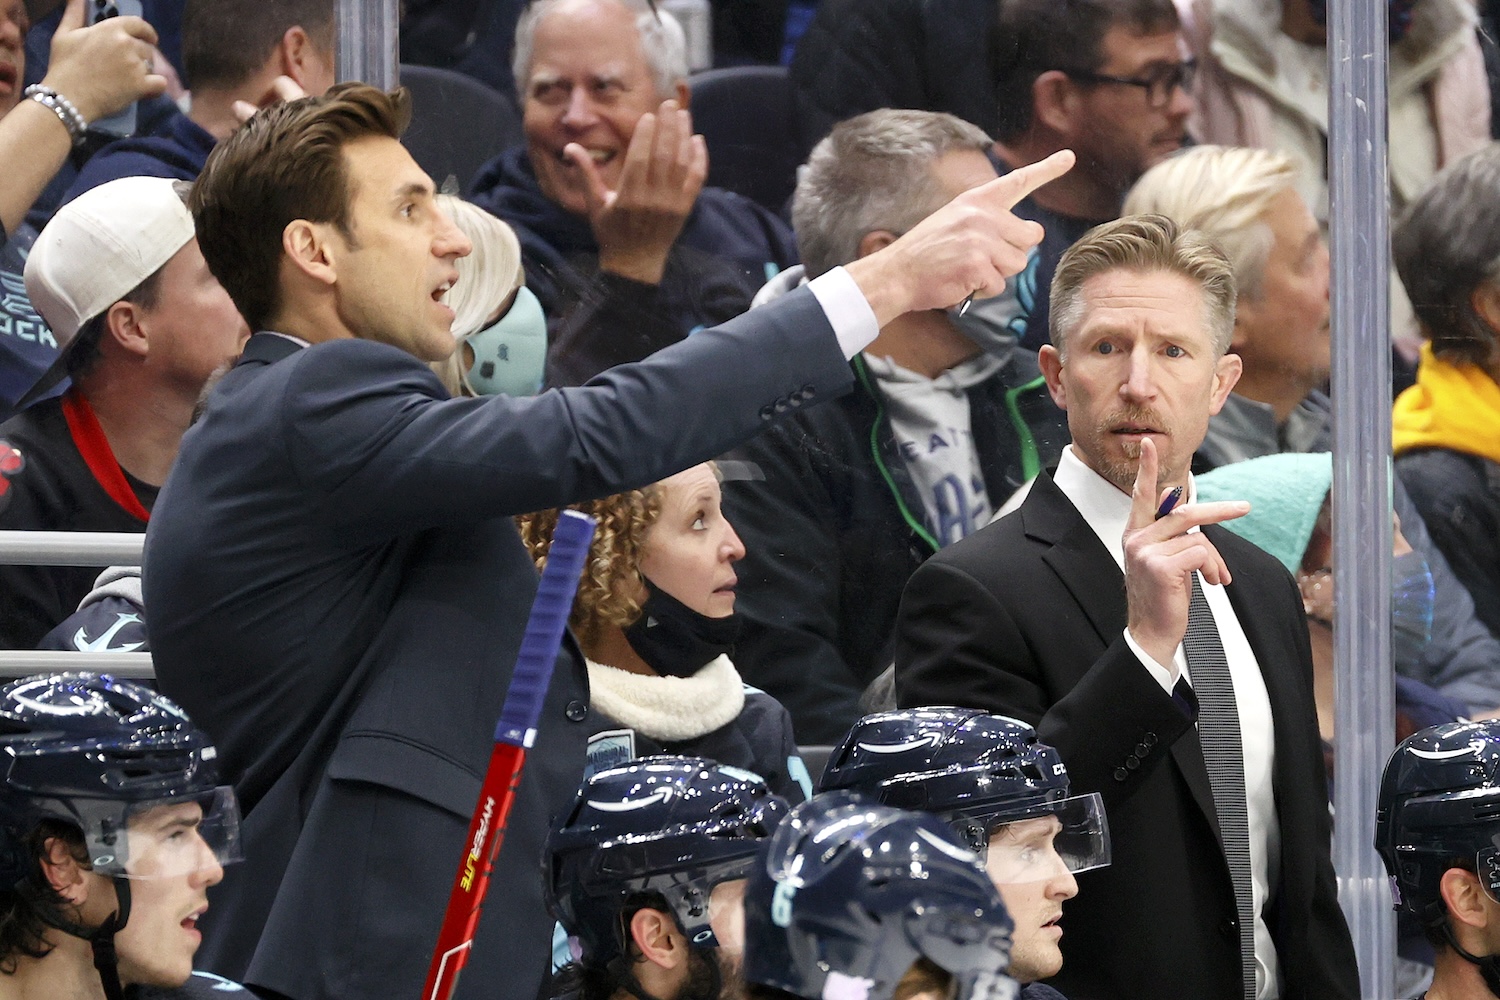 SEATTLE, WASHINGTON - NOVEMBER 17: Assistant coach Jay Leach and head coach Dave Hakstol of the Seattle Kraken look on against the Chicago Blackhawks during the third period at Climate Pledge Arena on November 17, 2021 in Seattle, Washington. (Photo by Steph Chambers/Getty Images)